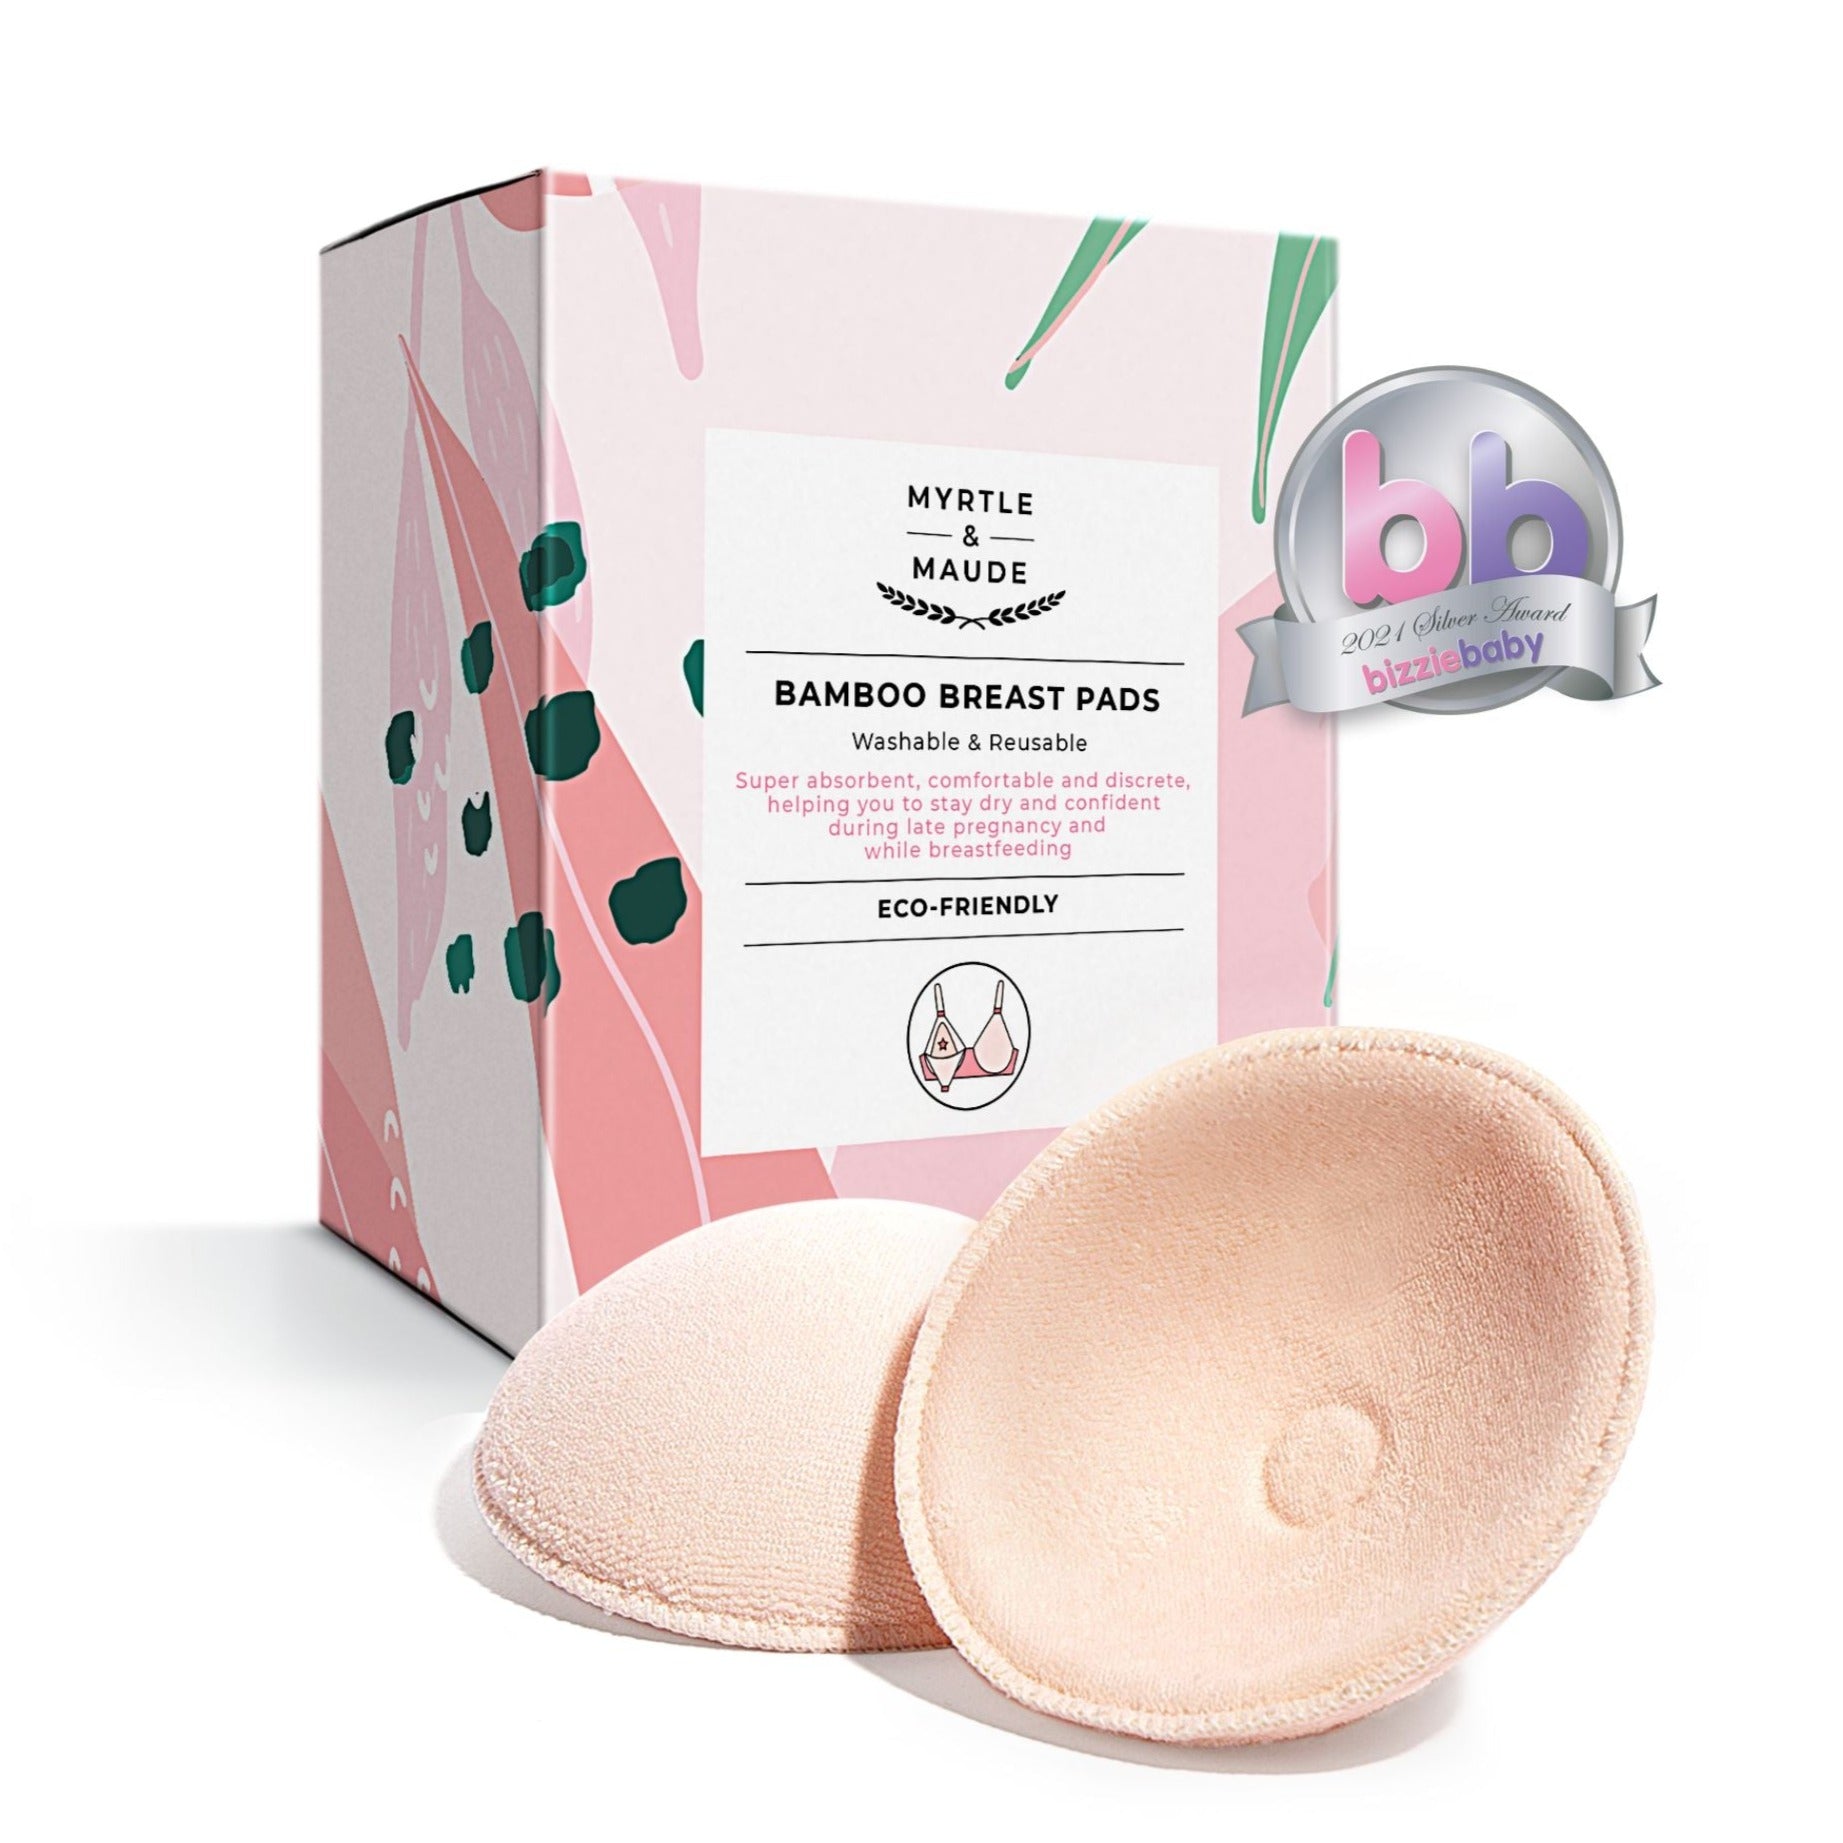 Reusable Bamboo Breast Pads UK - Myrtle and Maude